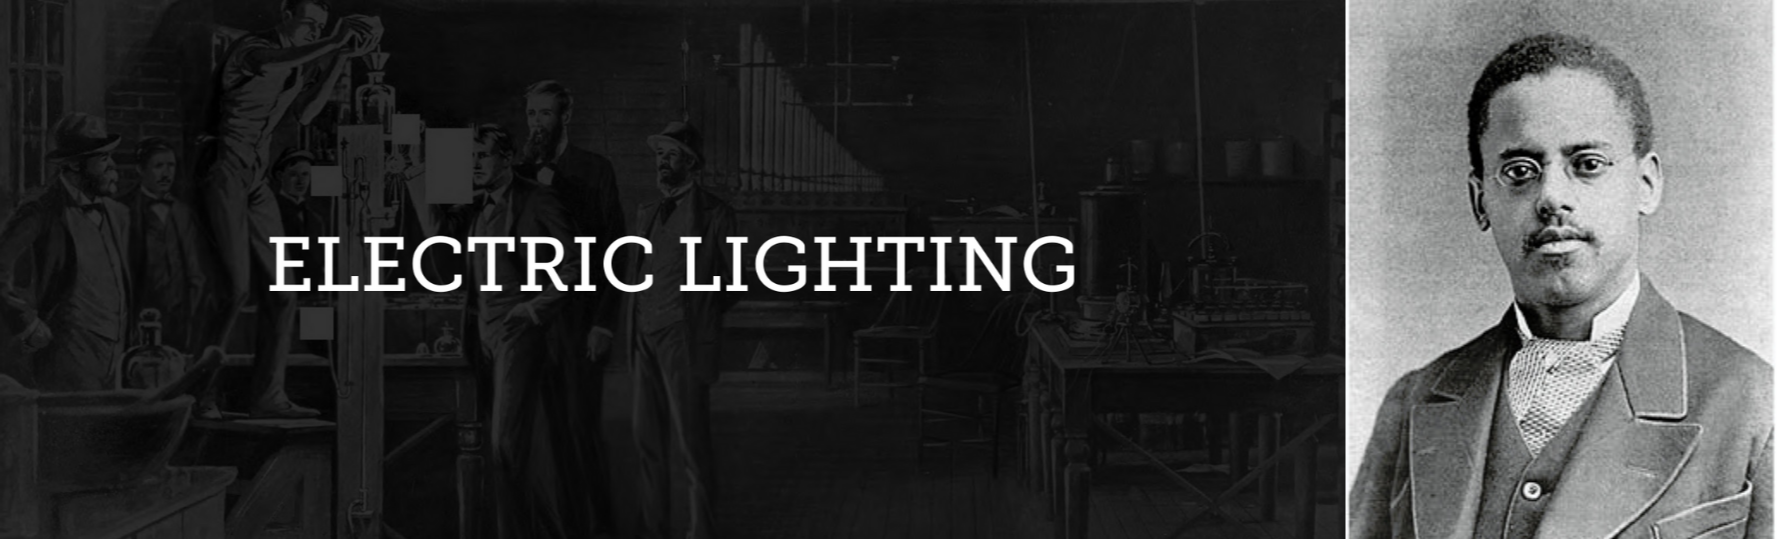 Electric Lighting Section with image of Lewis Latimer